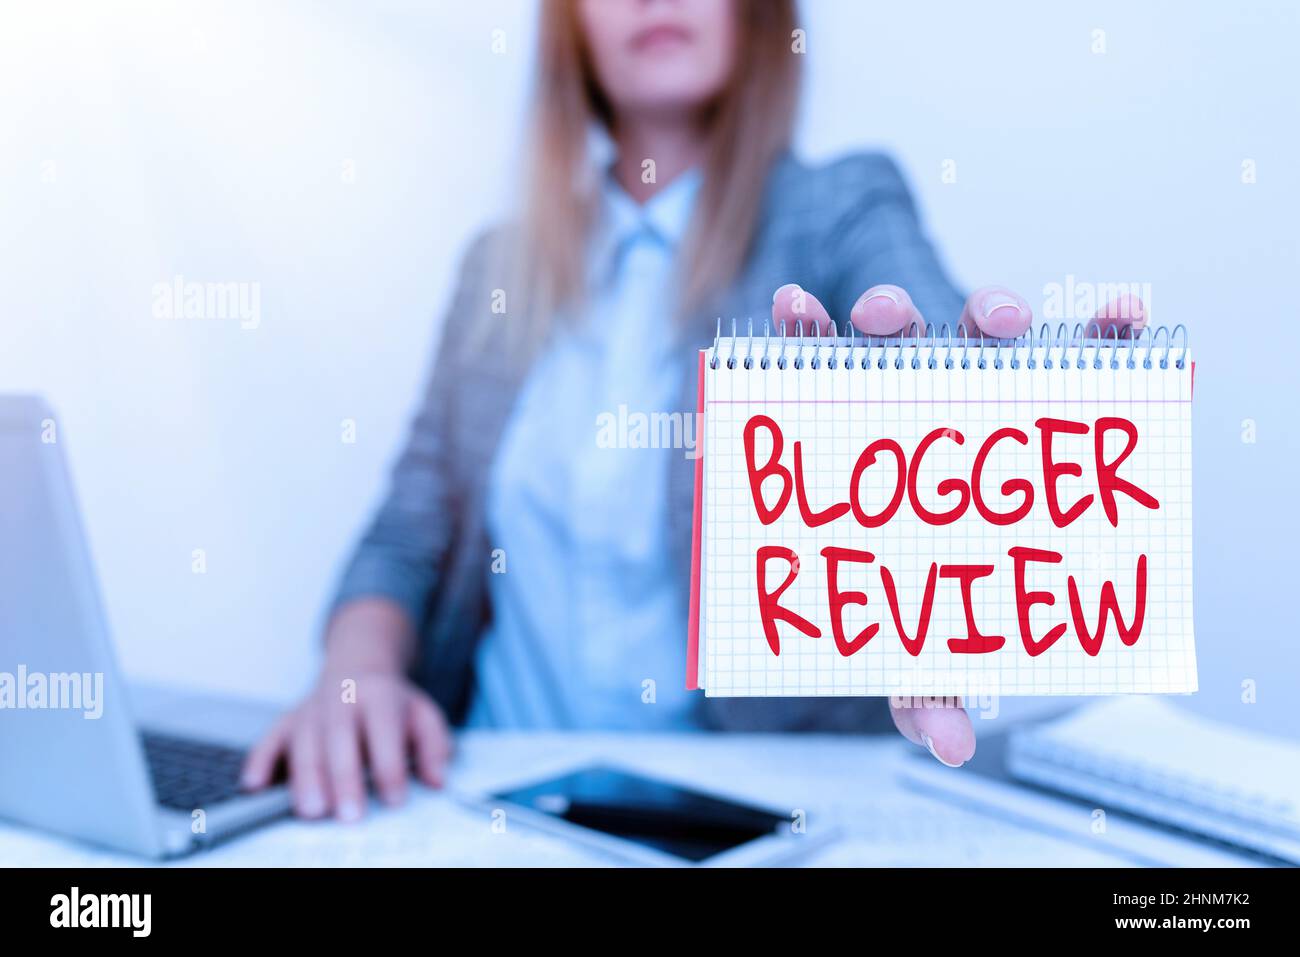 Writing displaying text Blogger Review, Concept meaning making a critical reconsideration and summary of a blog Financial Advisor Giving Money Saving Stock Photo